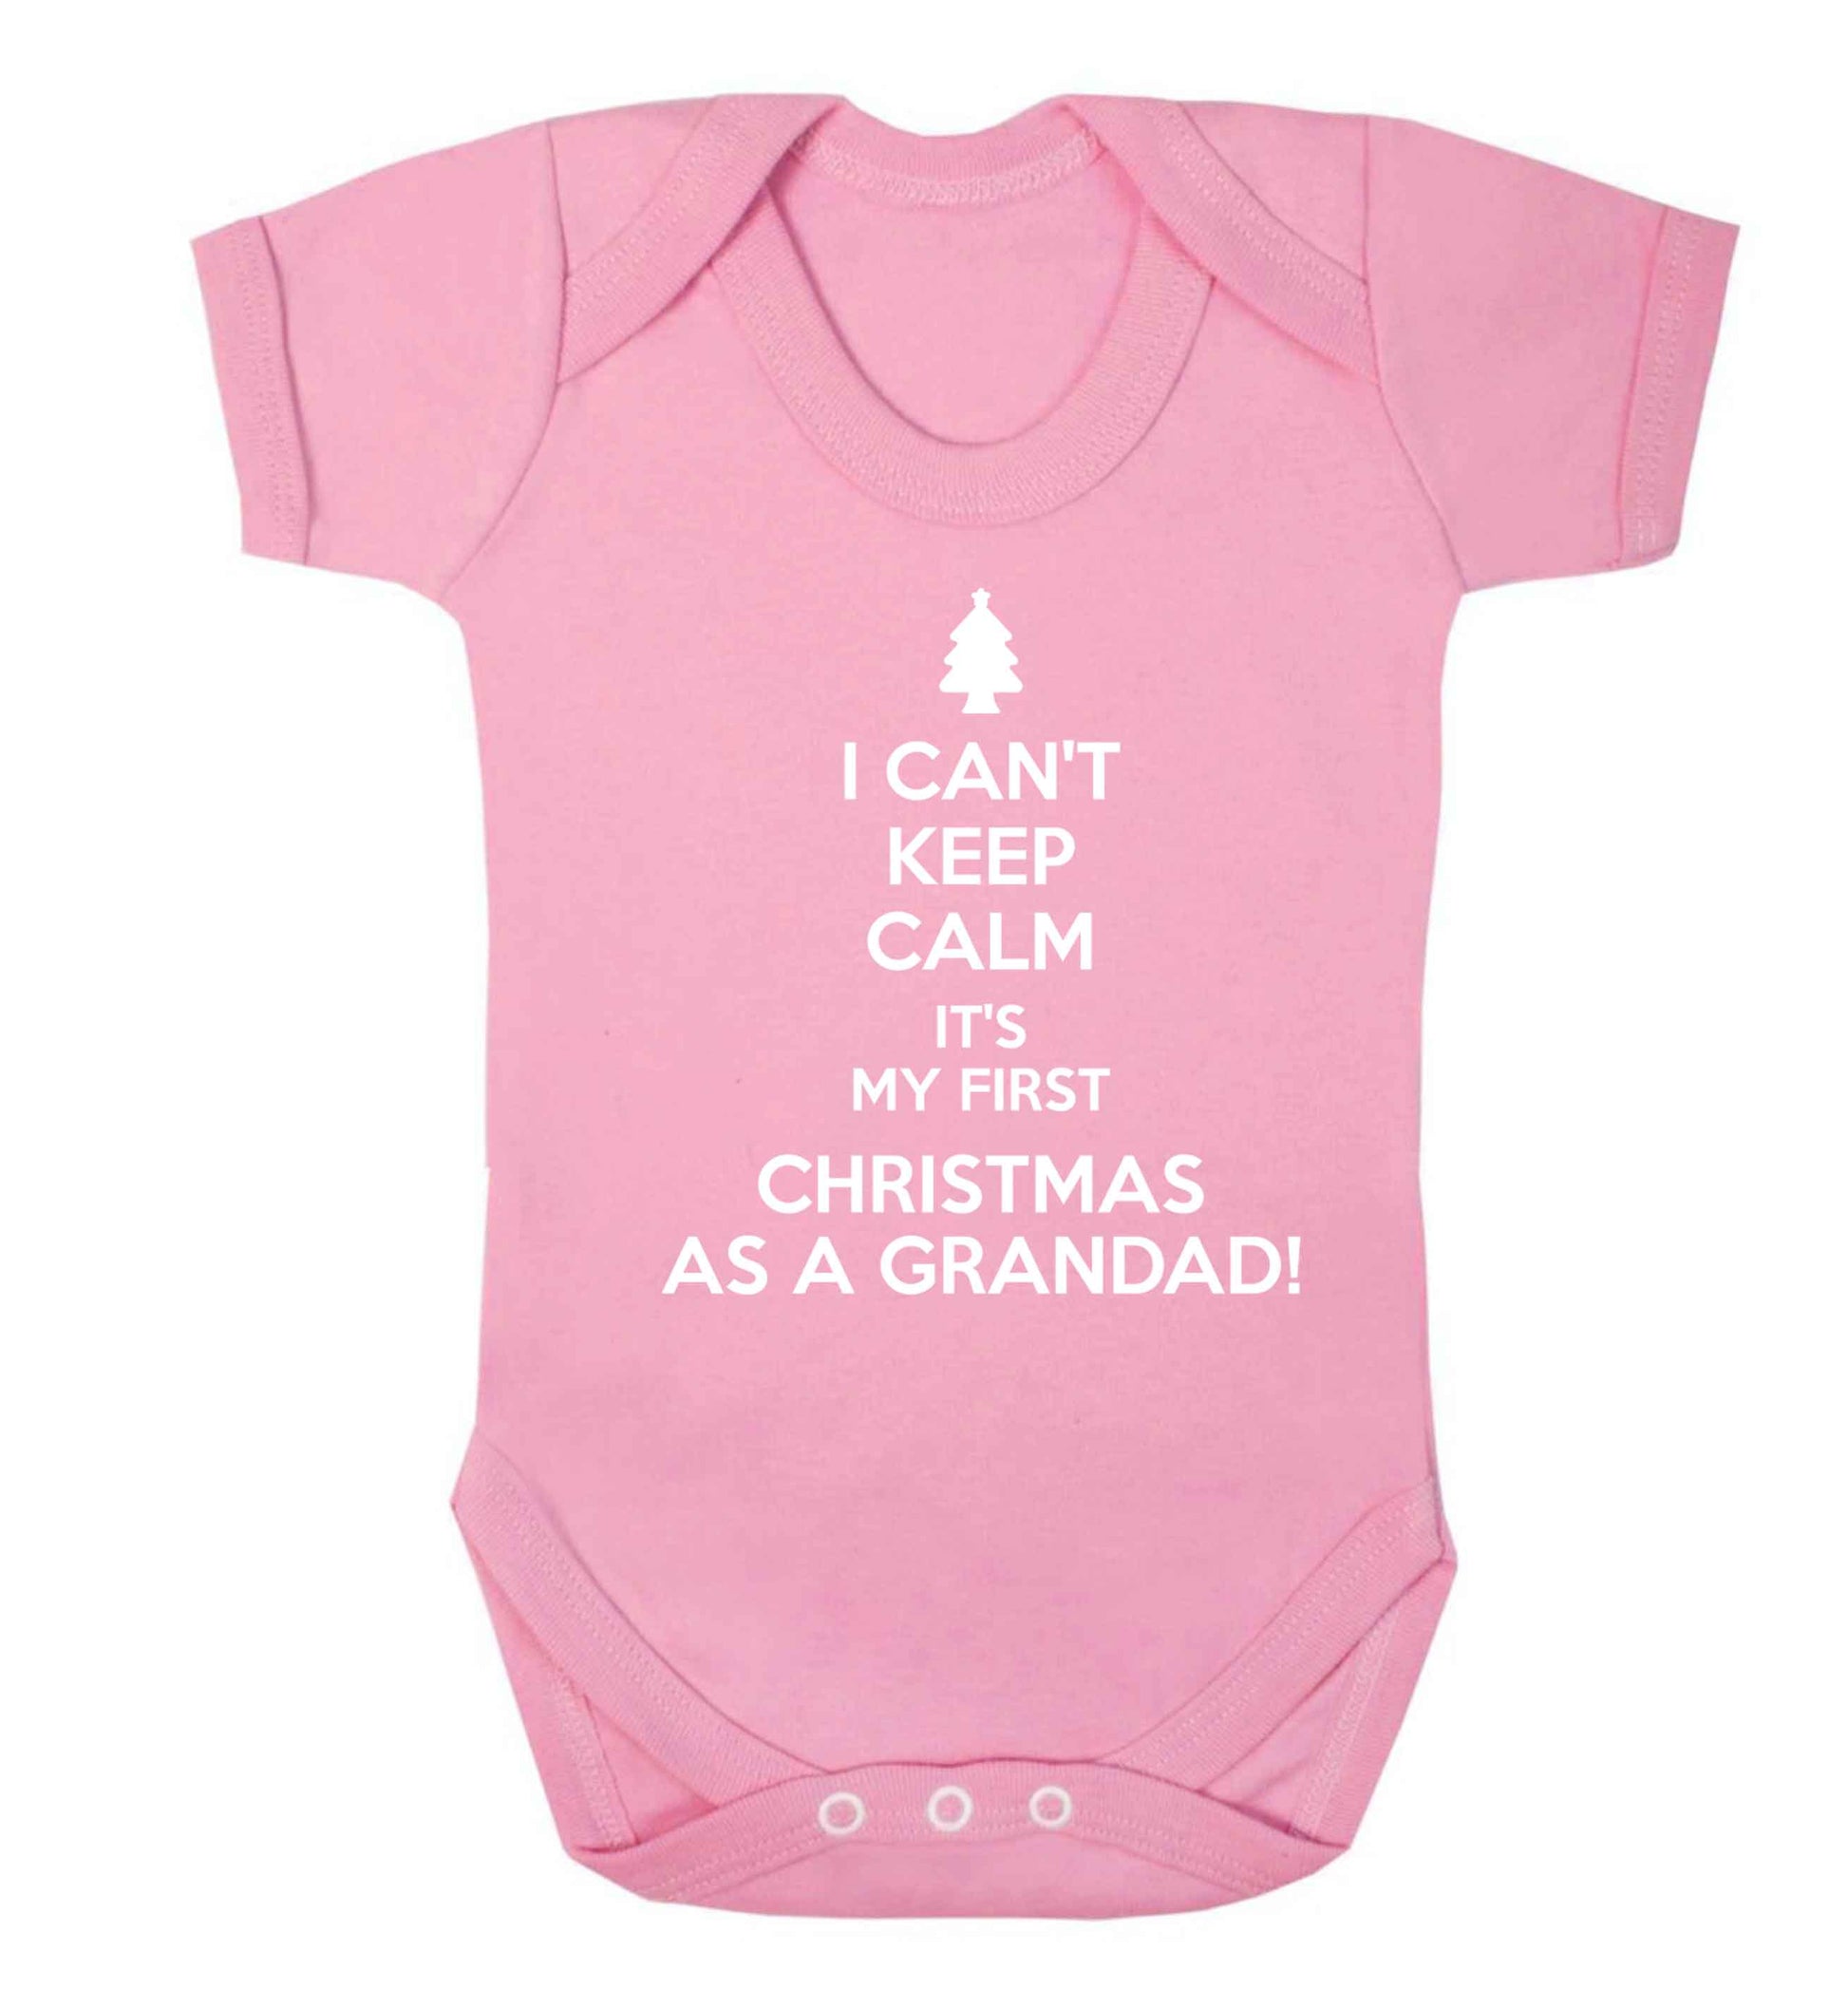 I can't keep calm it's my first Christmas as a grandad! Baby Vest pale pink 18-24 months